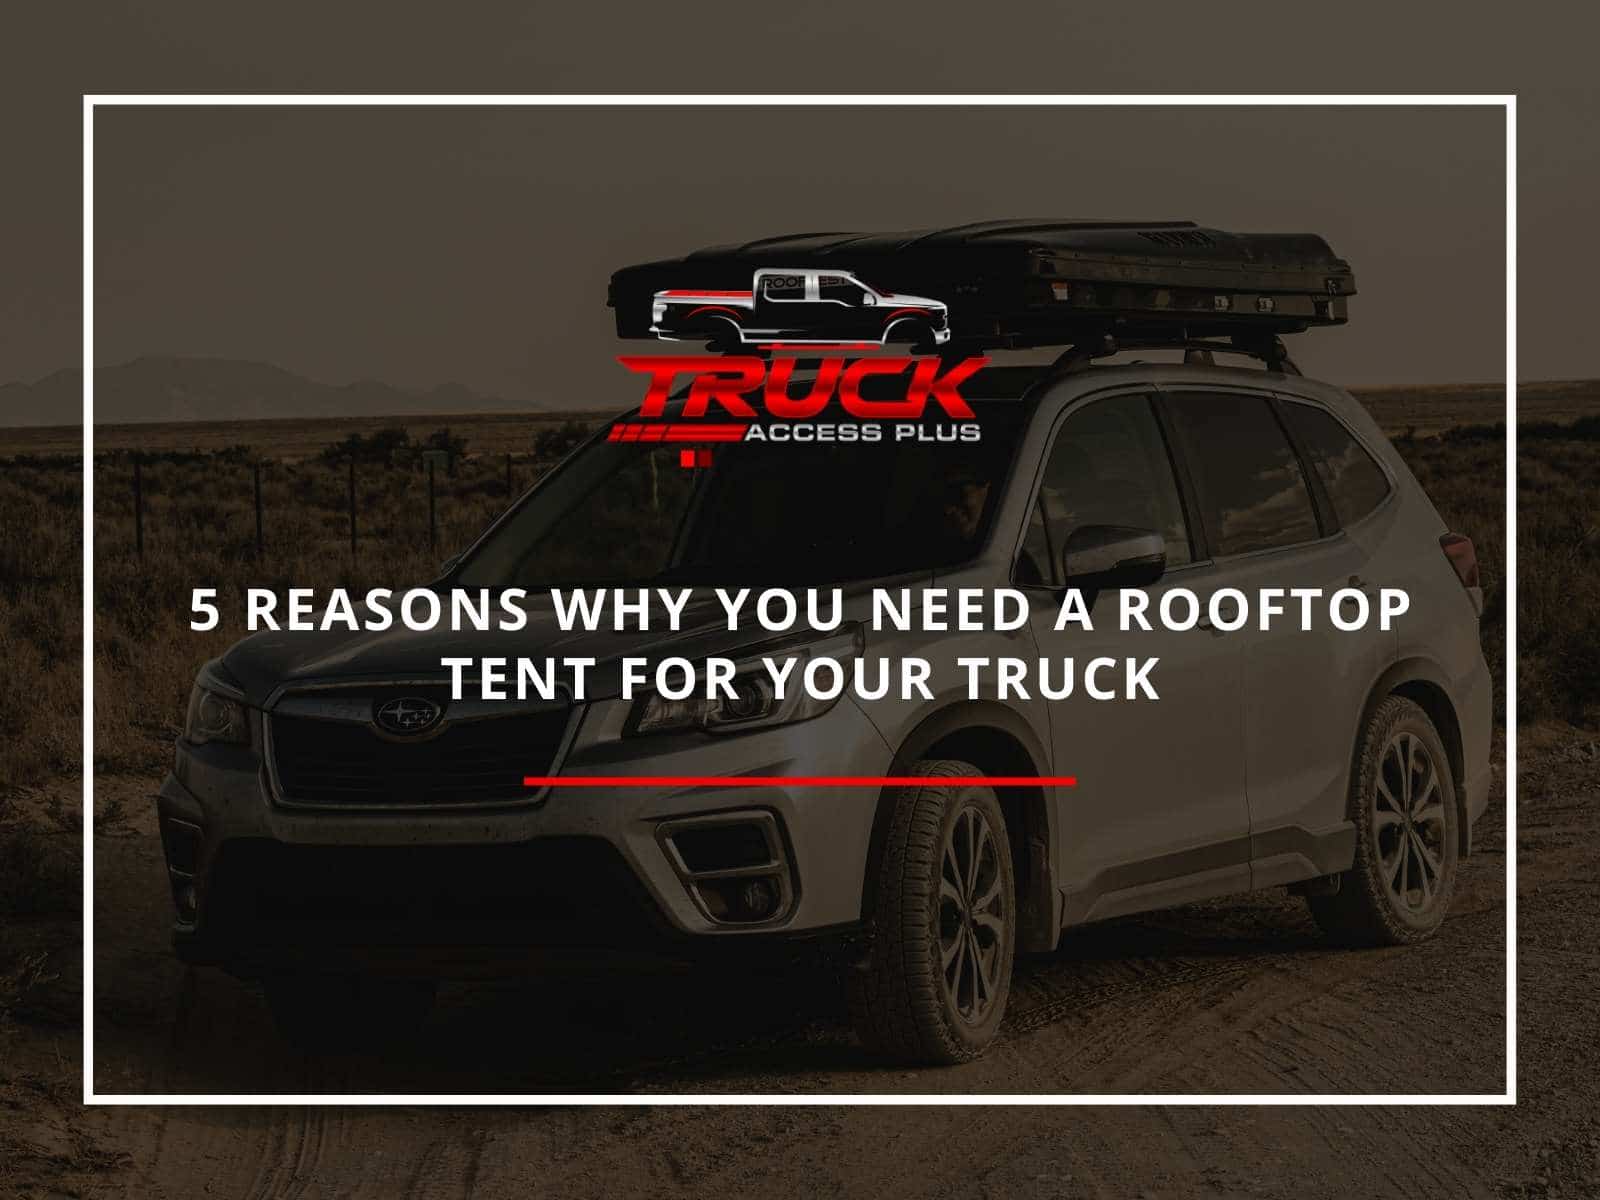 5 Reasons Why You Need A Rooftop Tent For Your Truck